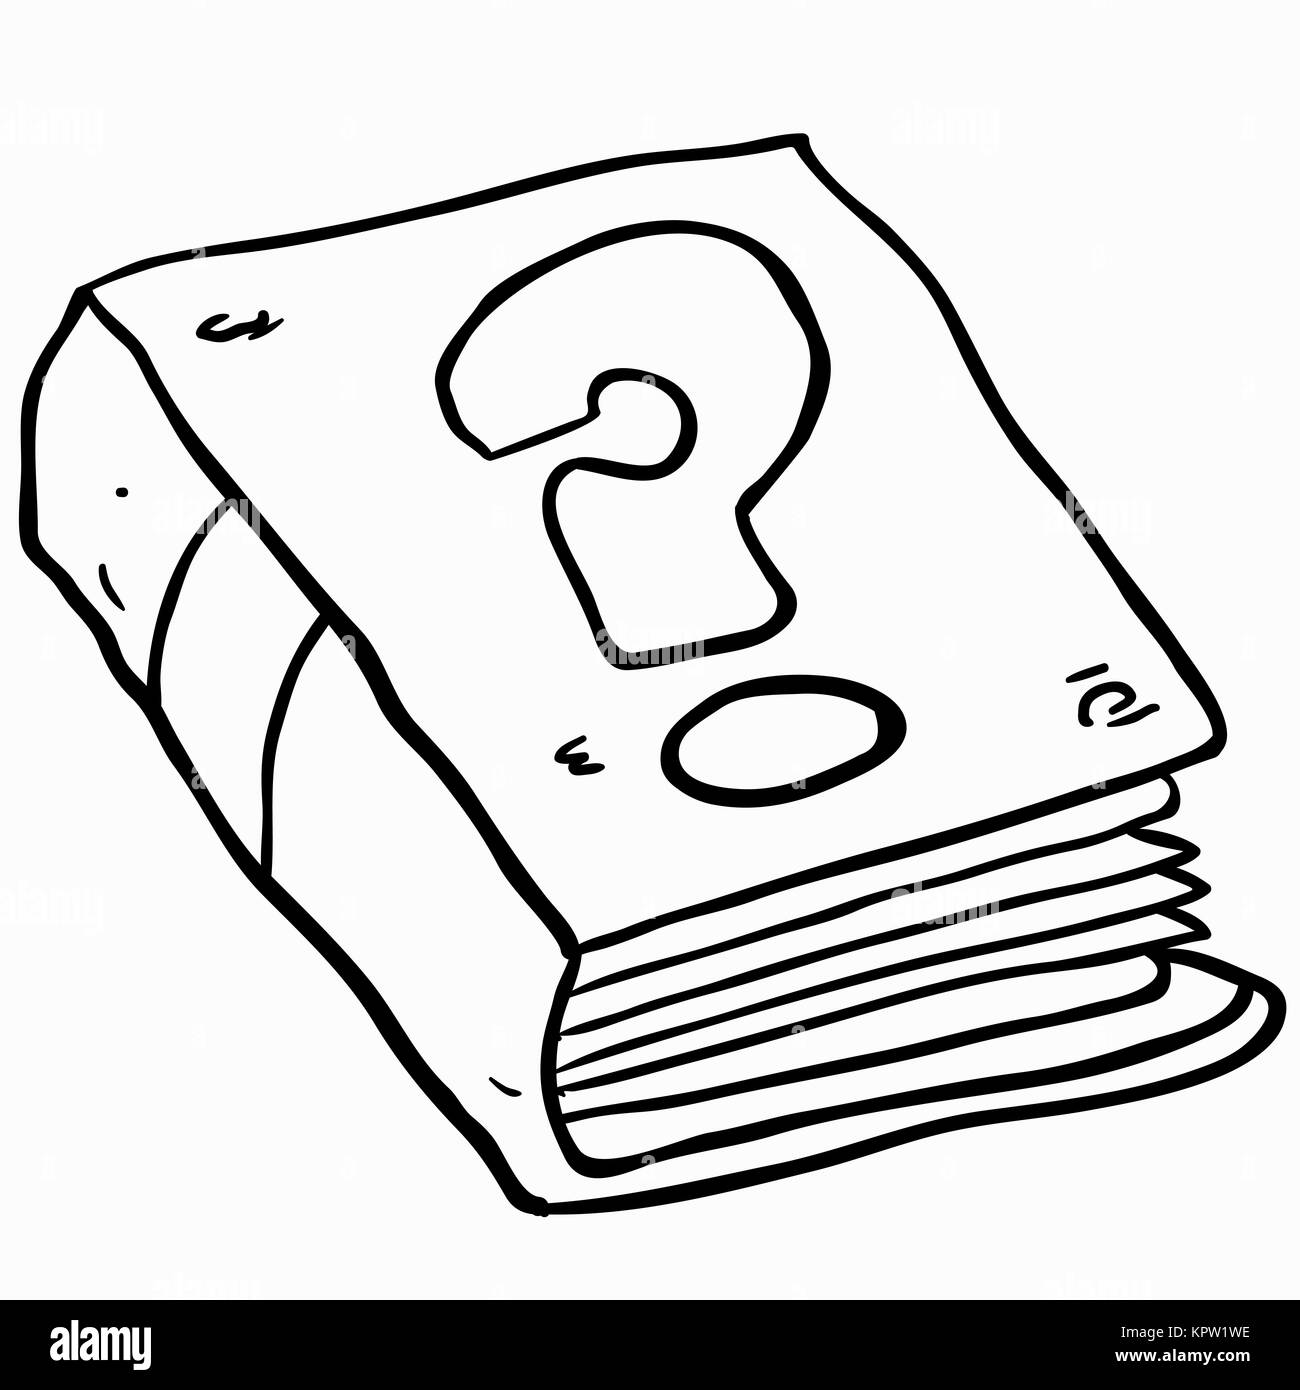 black and white book with question mark Stock Photo